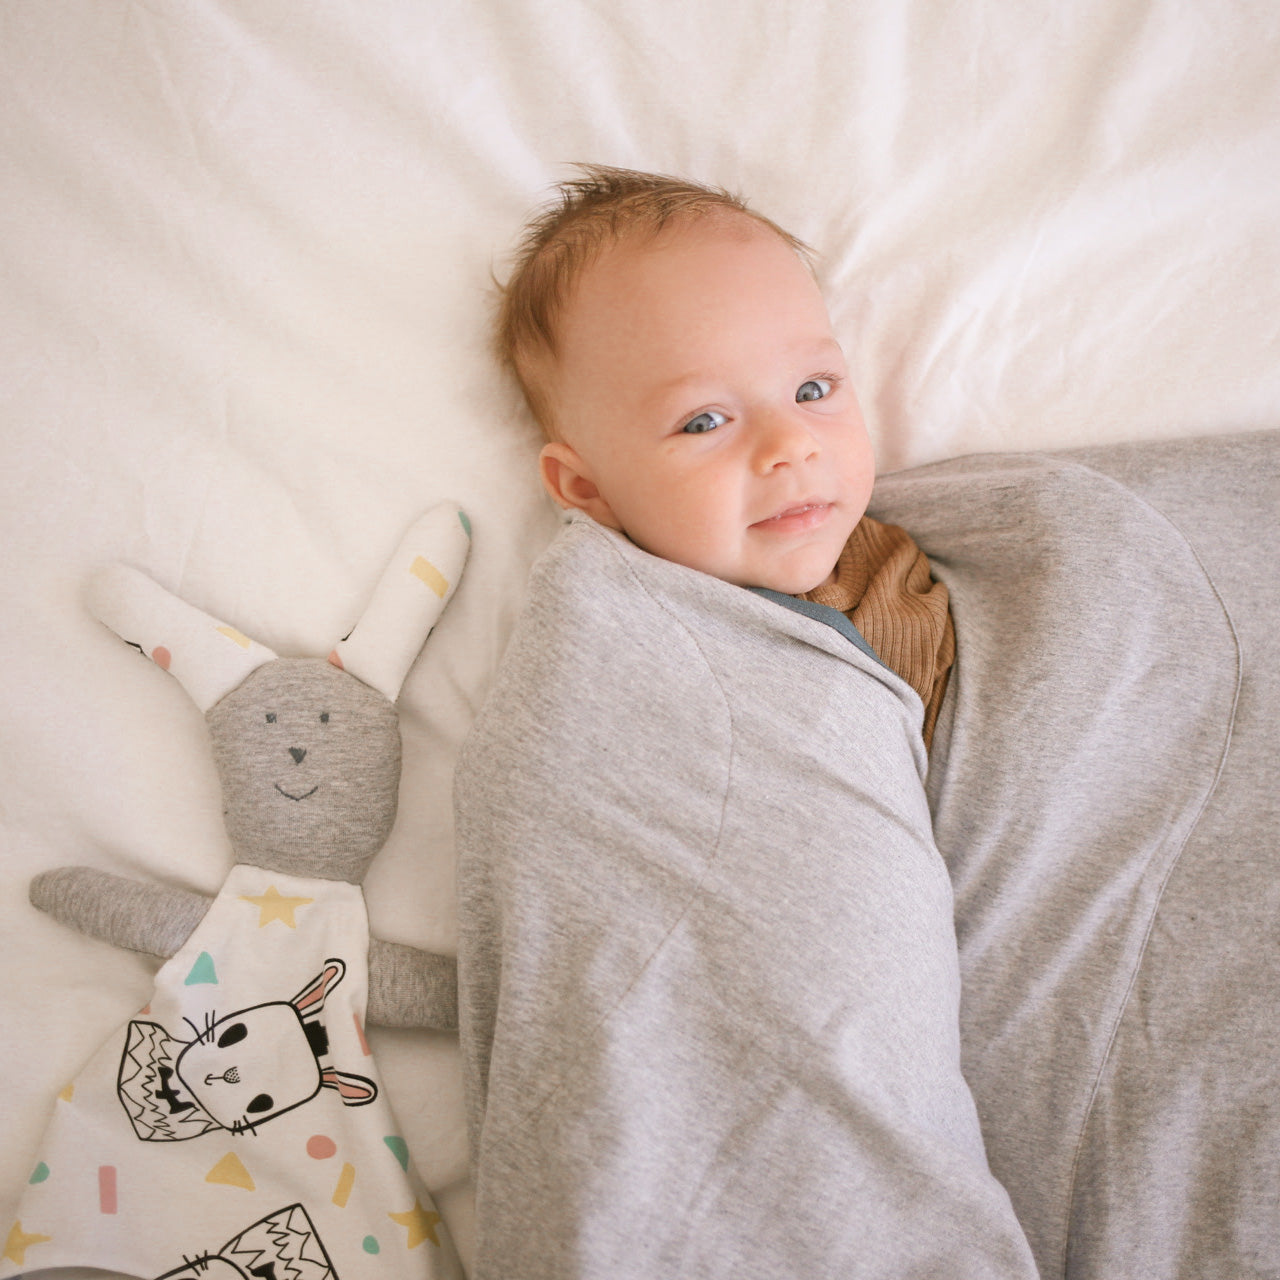 Swaddle blanket wrap with genius arm pockets